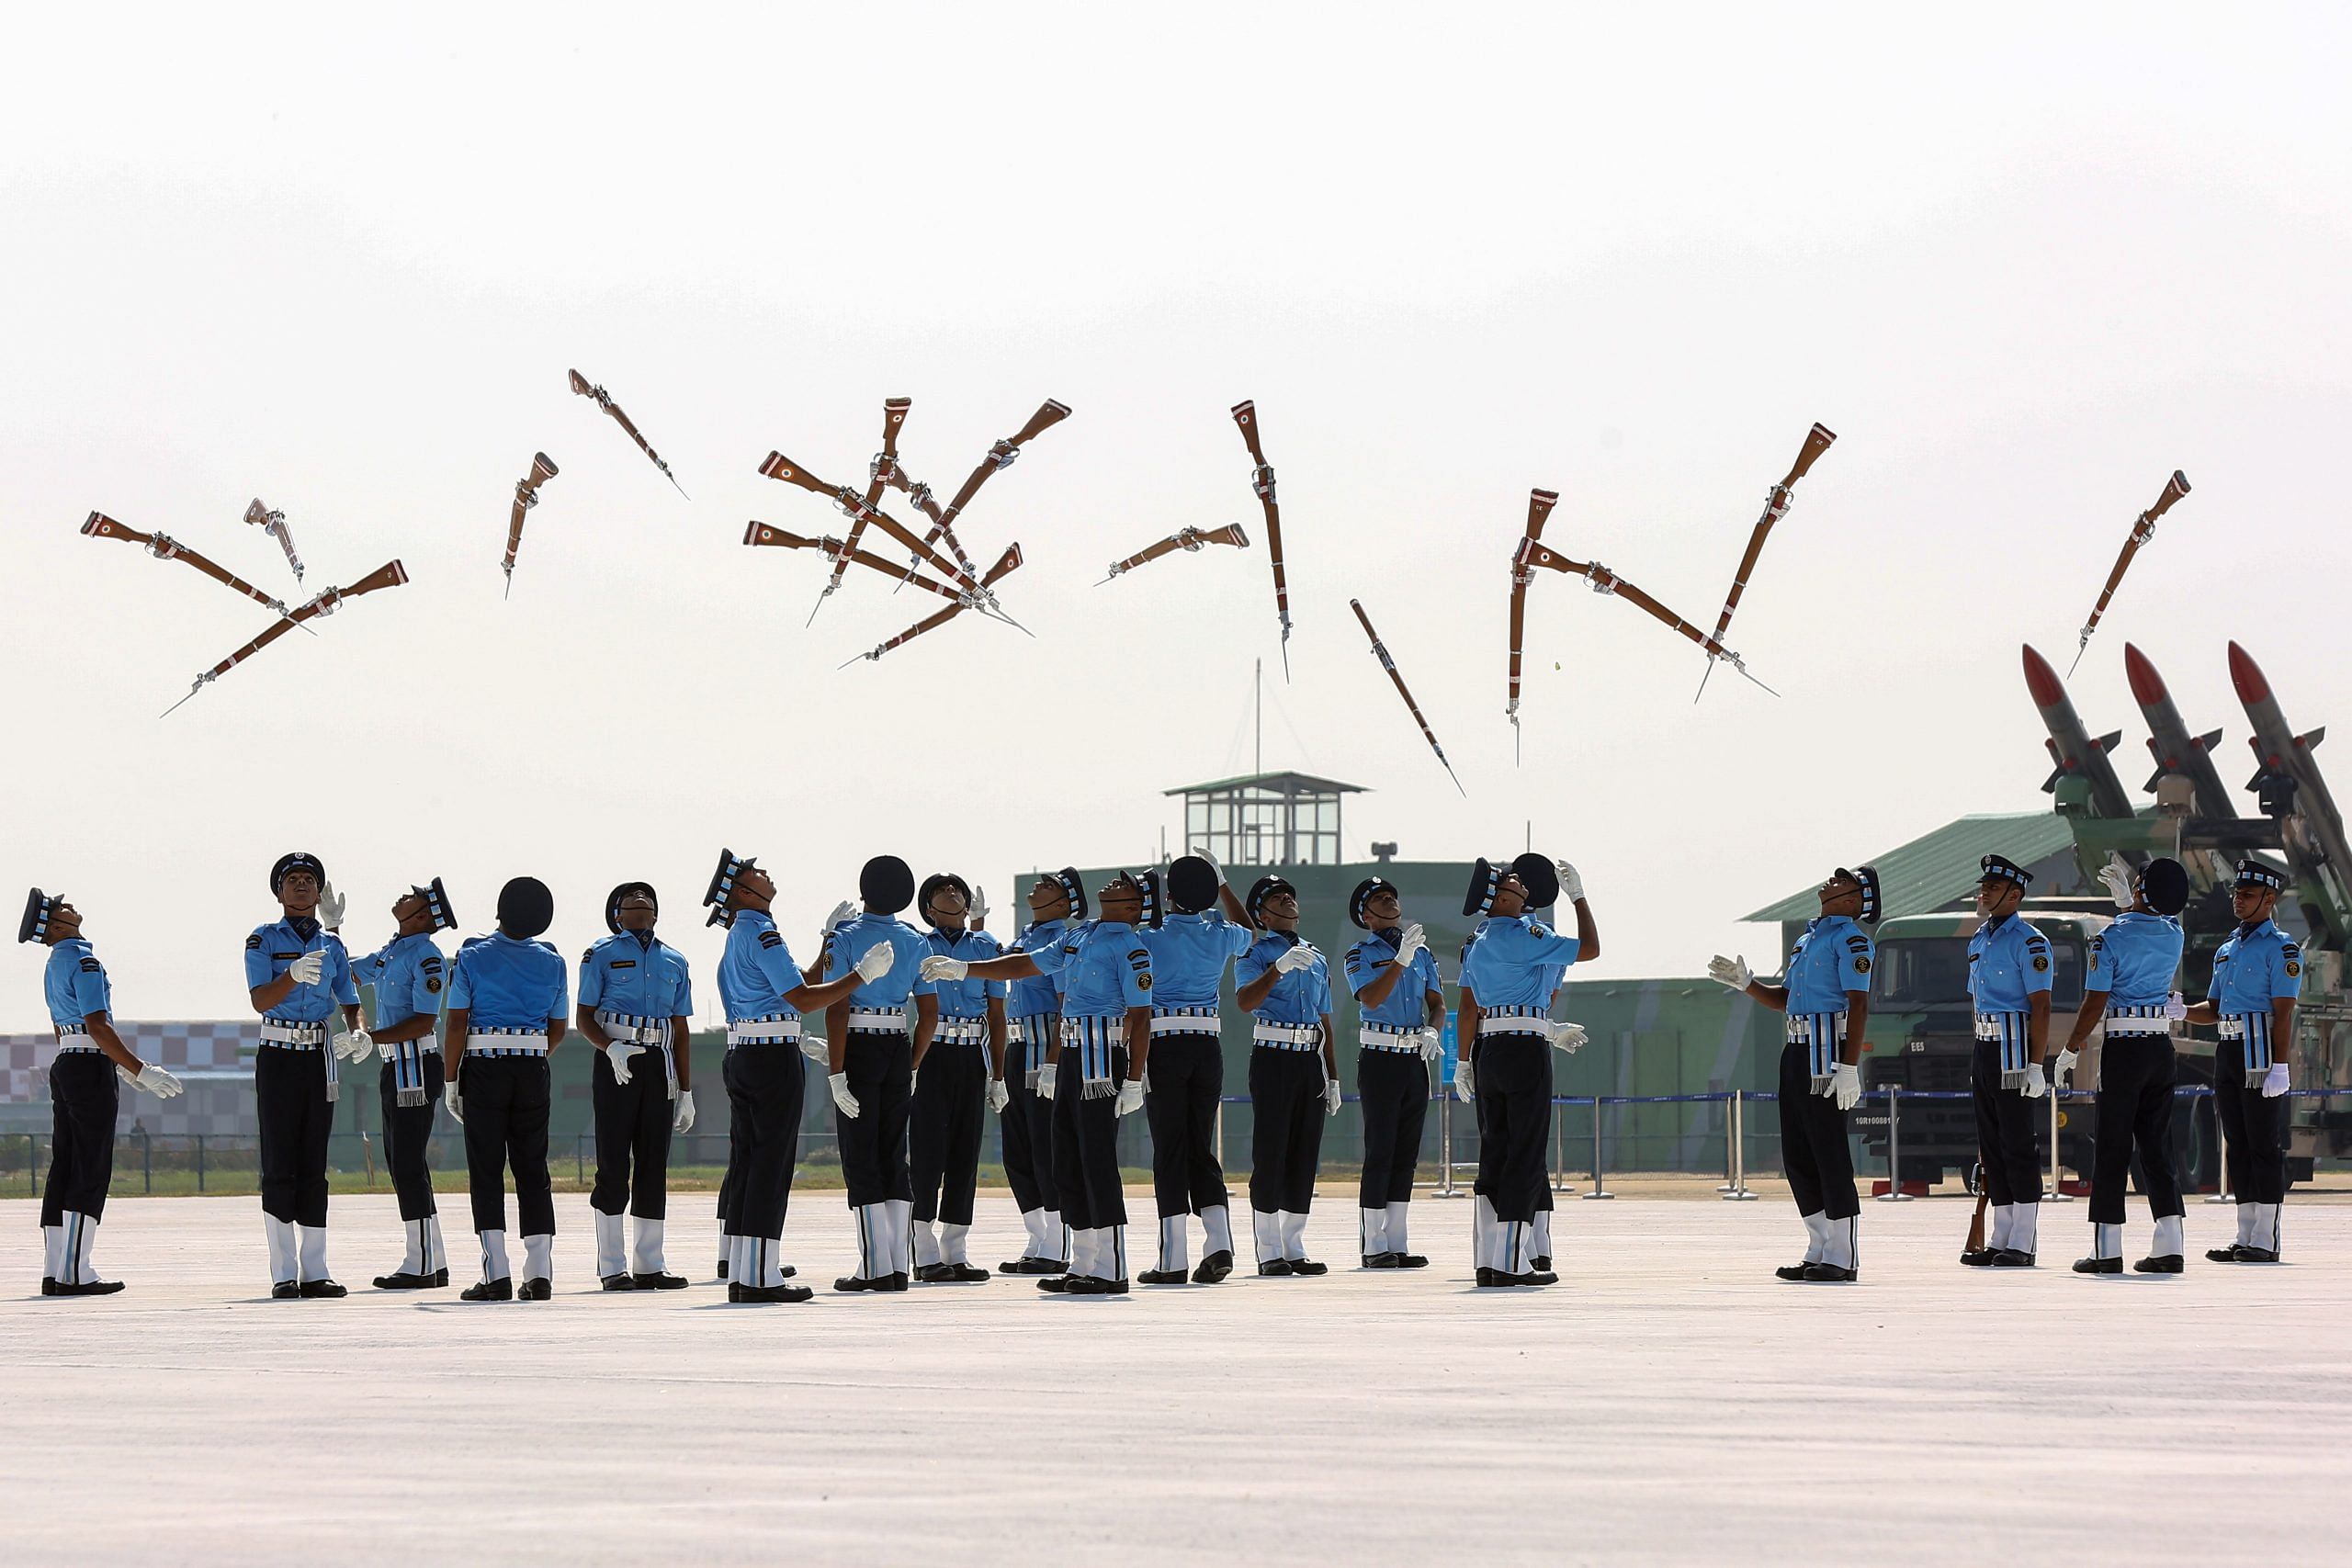 Air Force personnel after the march at the Air Force Day parade in Prayagraj | Suraj Singh Bisht | ThePrint